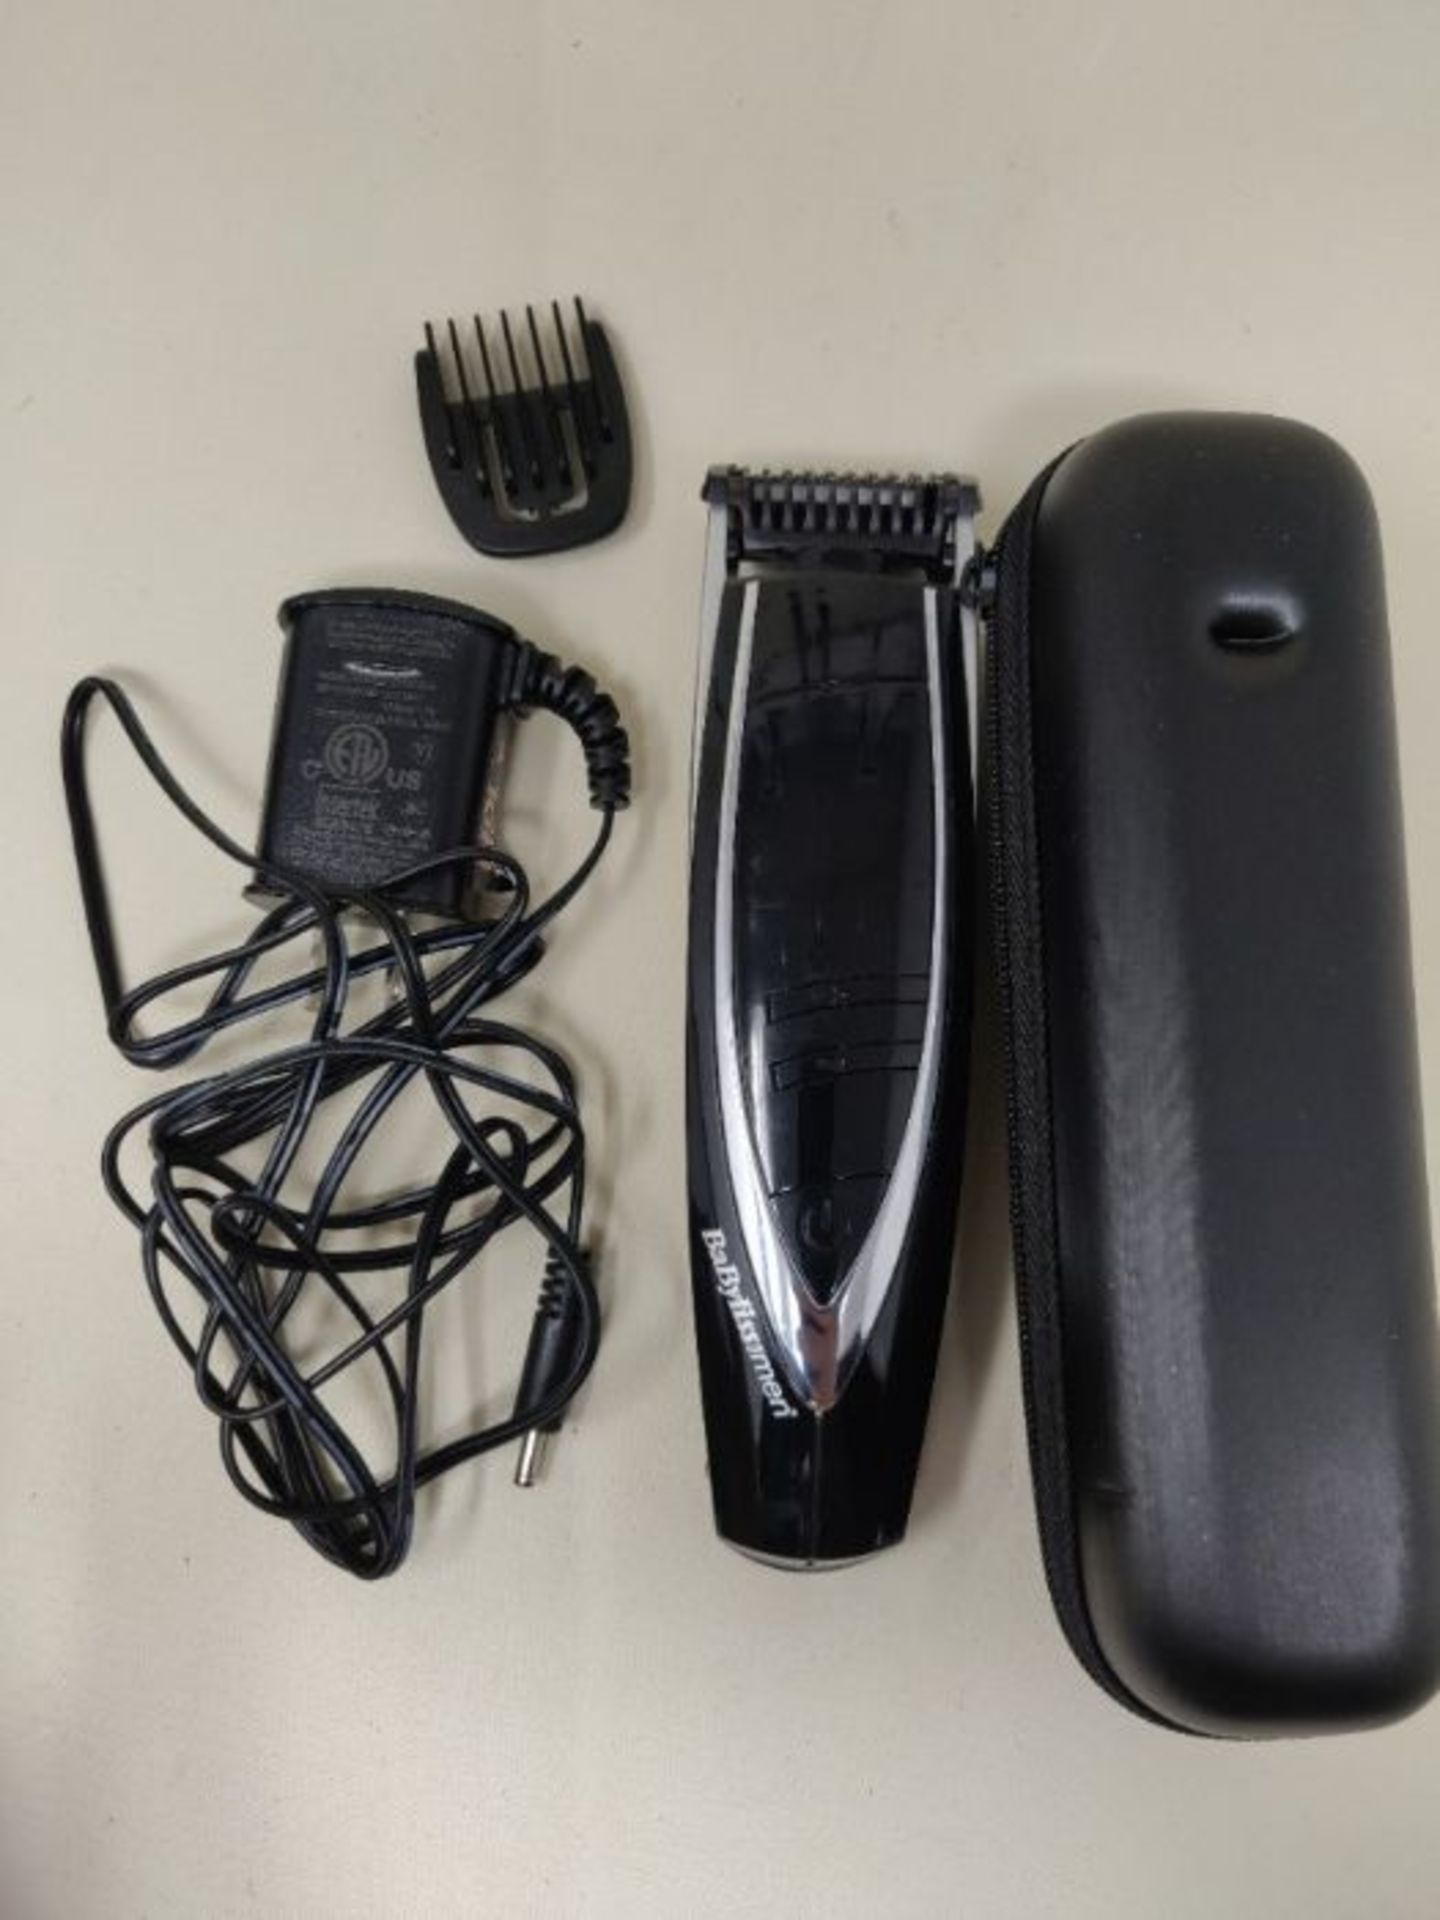 [INCOMPLETE] BaByliss MEN Super Stubble XTP Stubble and Beard Trimmer - Image 3 of 3